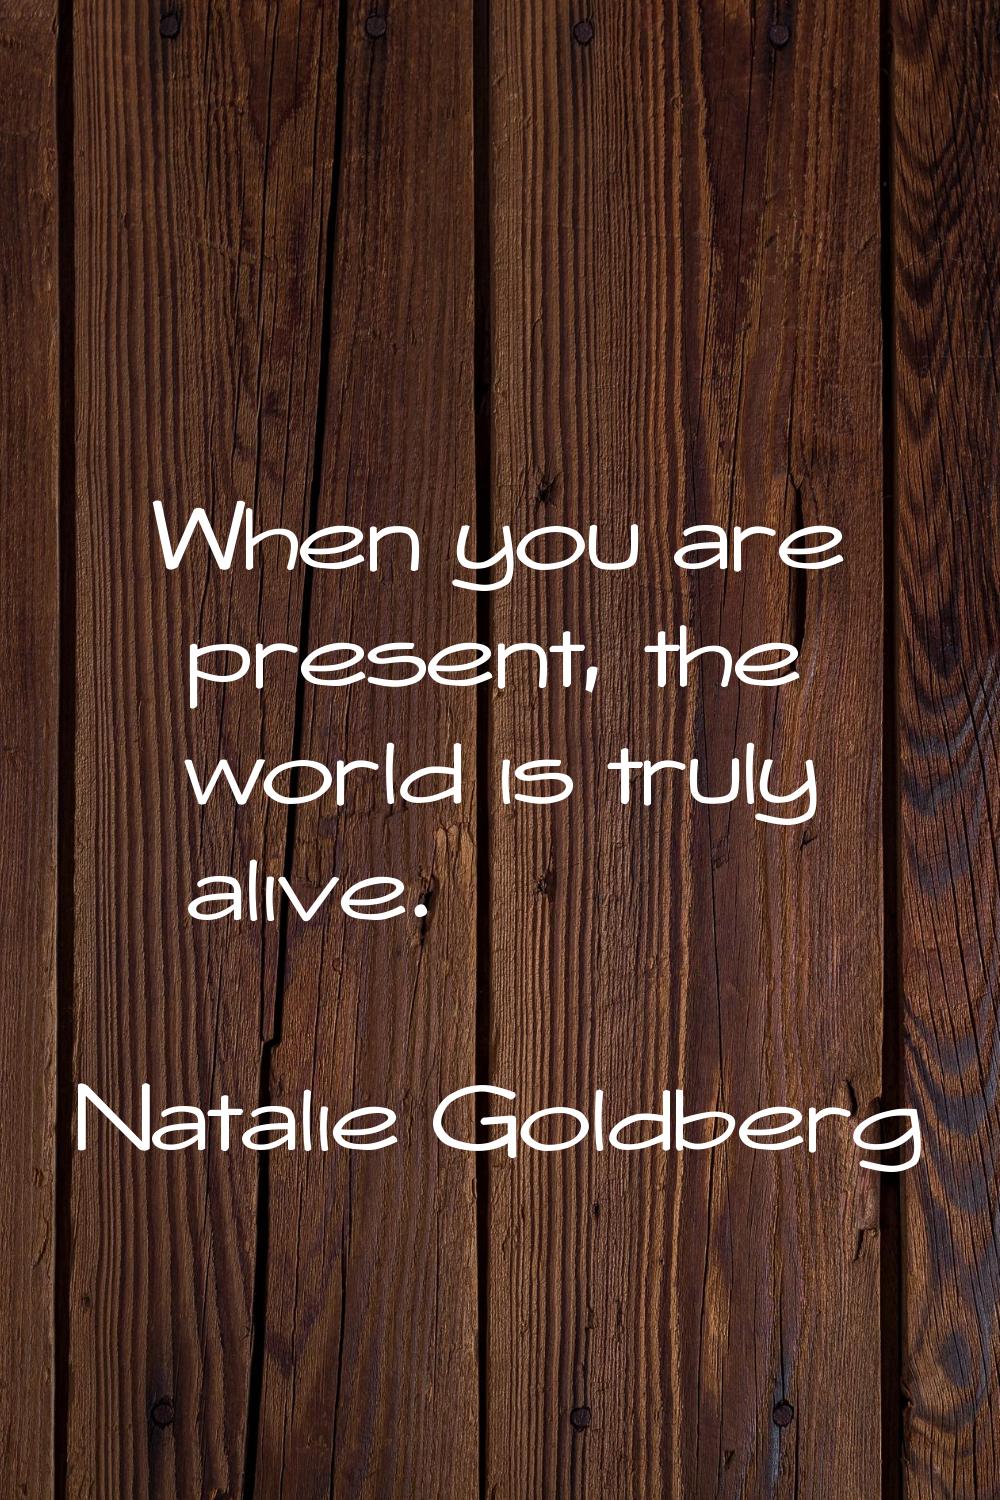 When you are present, the world is truly alive.